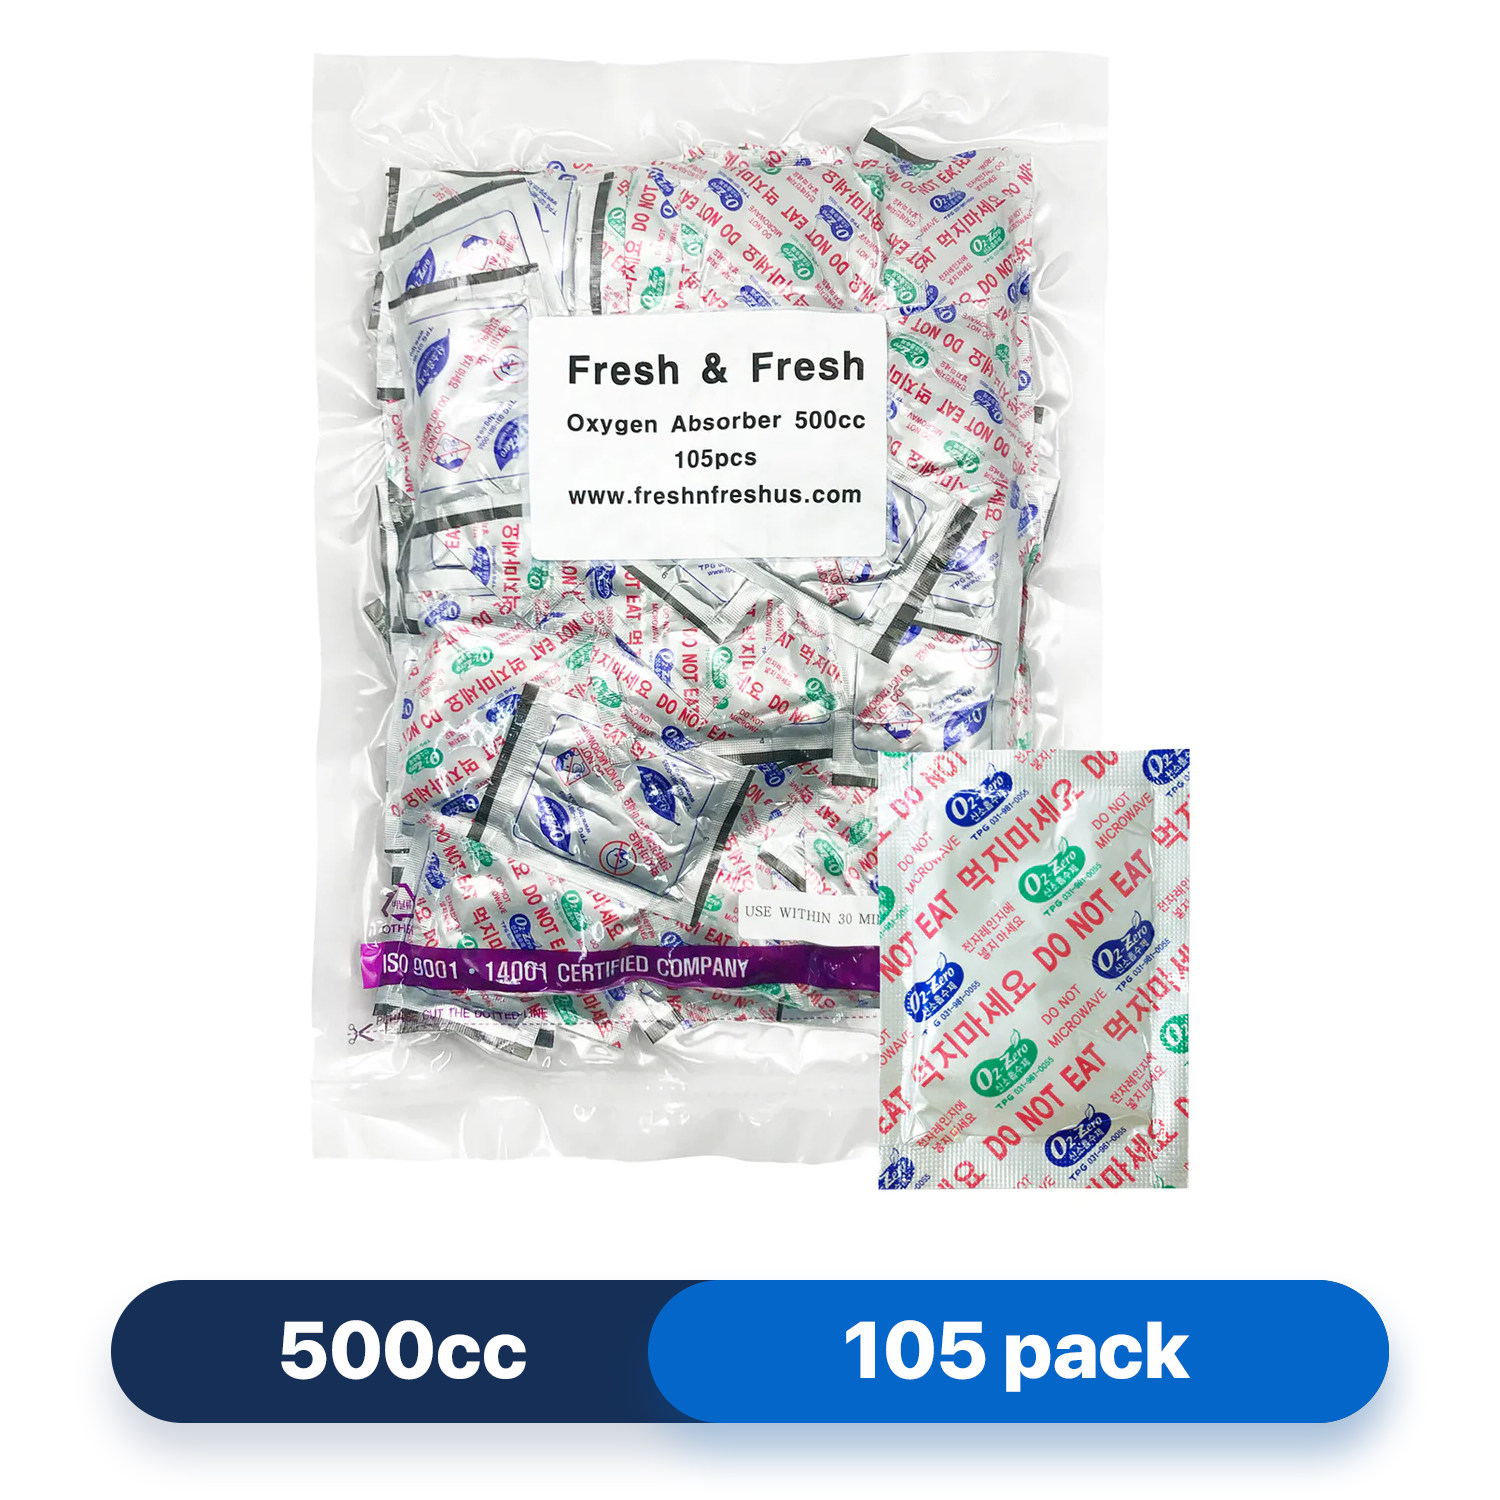 Fresh & Fresh (105 Packs) 500 CC Premium Oxygen Absorbers(1 Bag of 105 Packets) - ISO 9001 Certified Facility Manufactured.